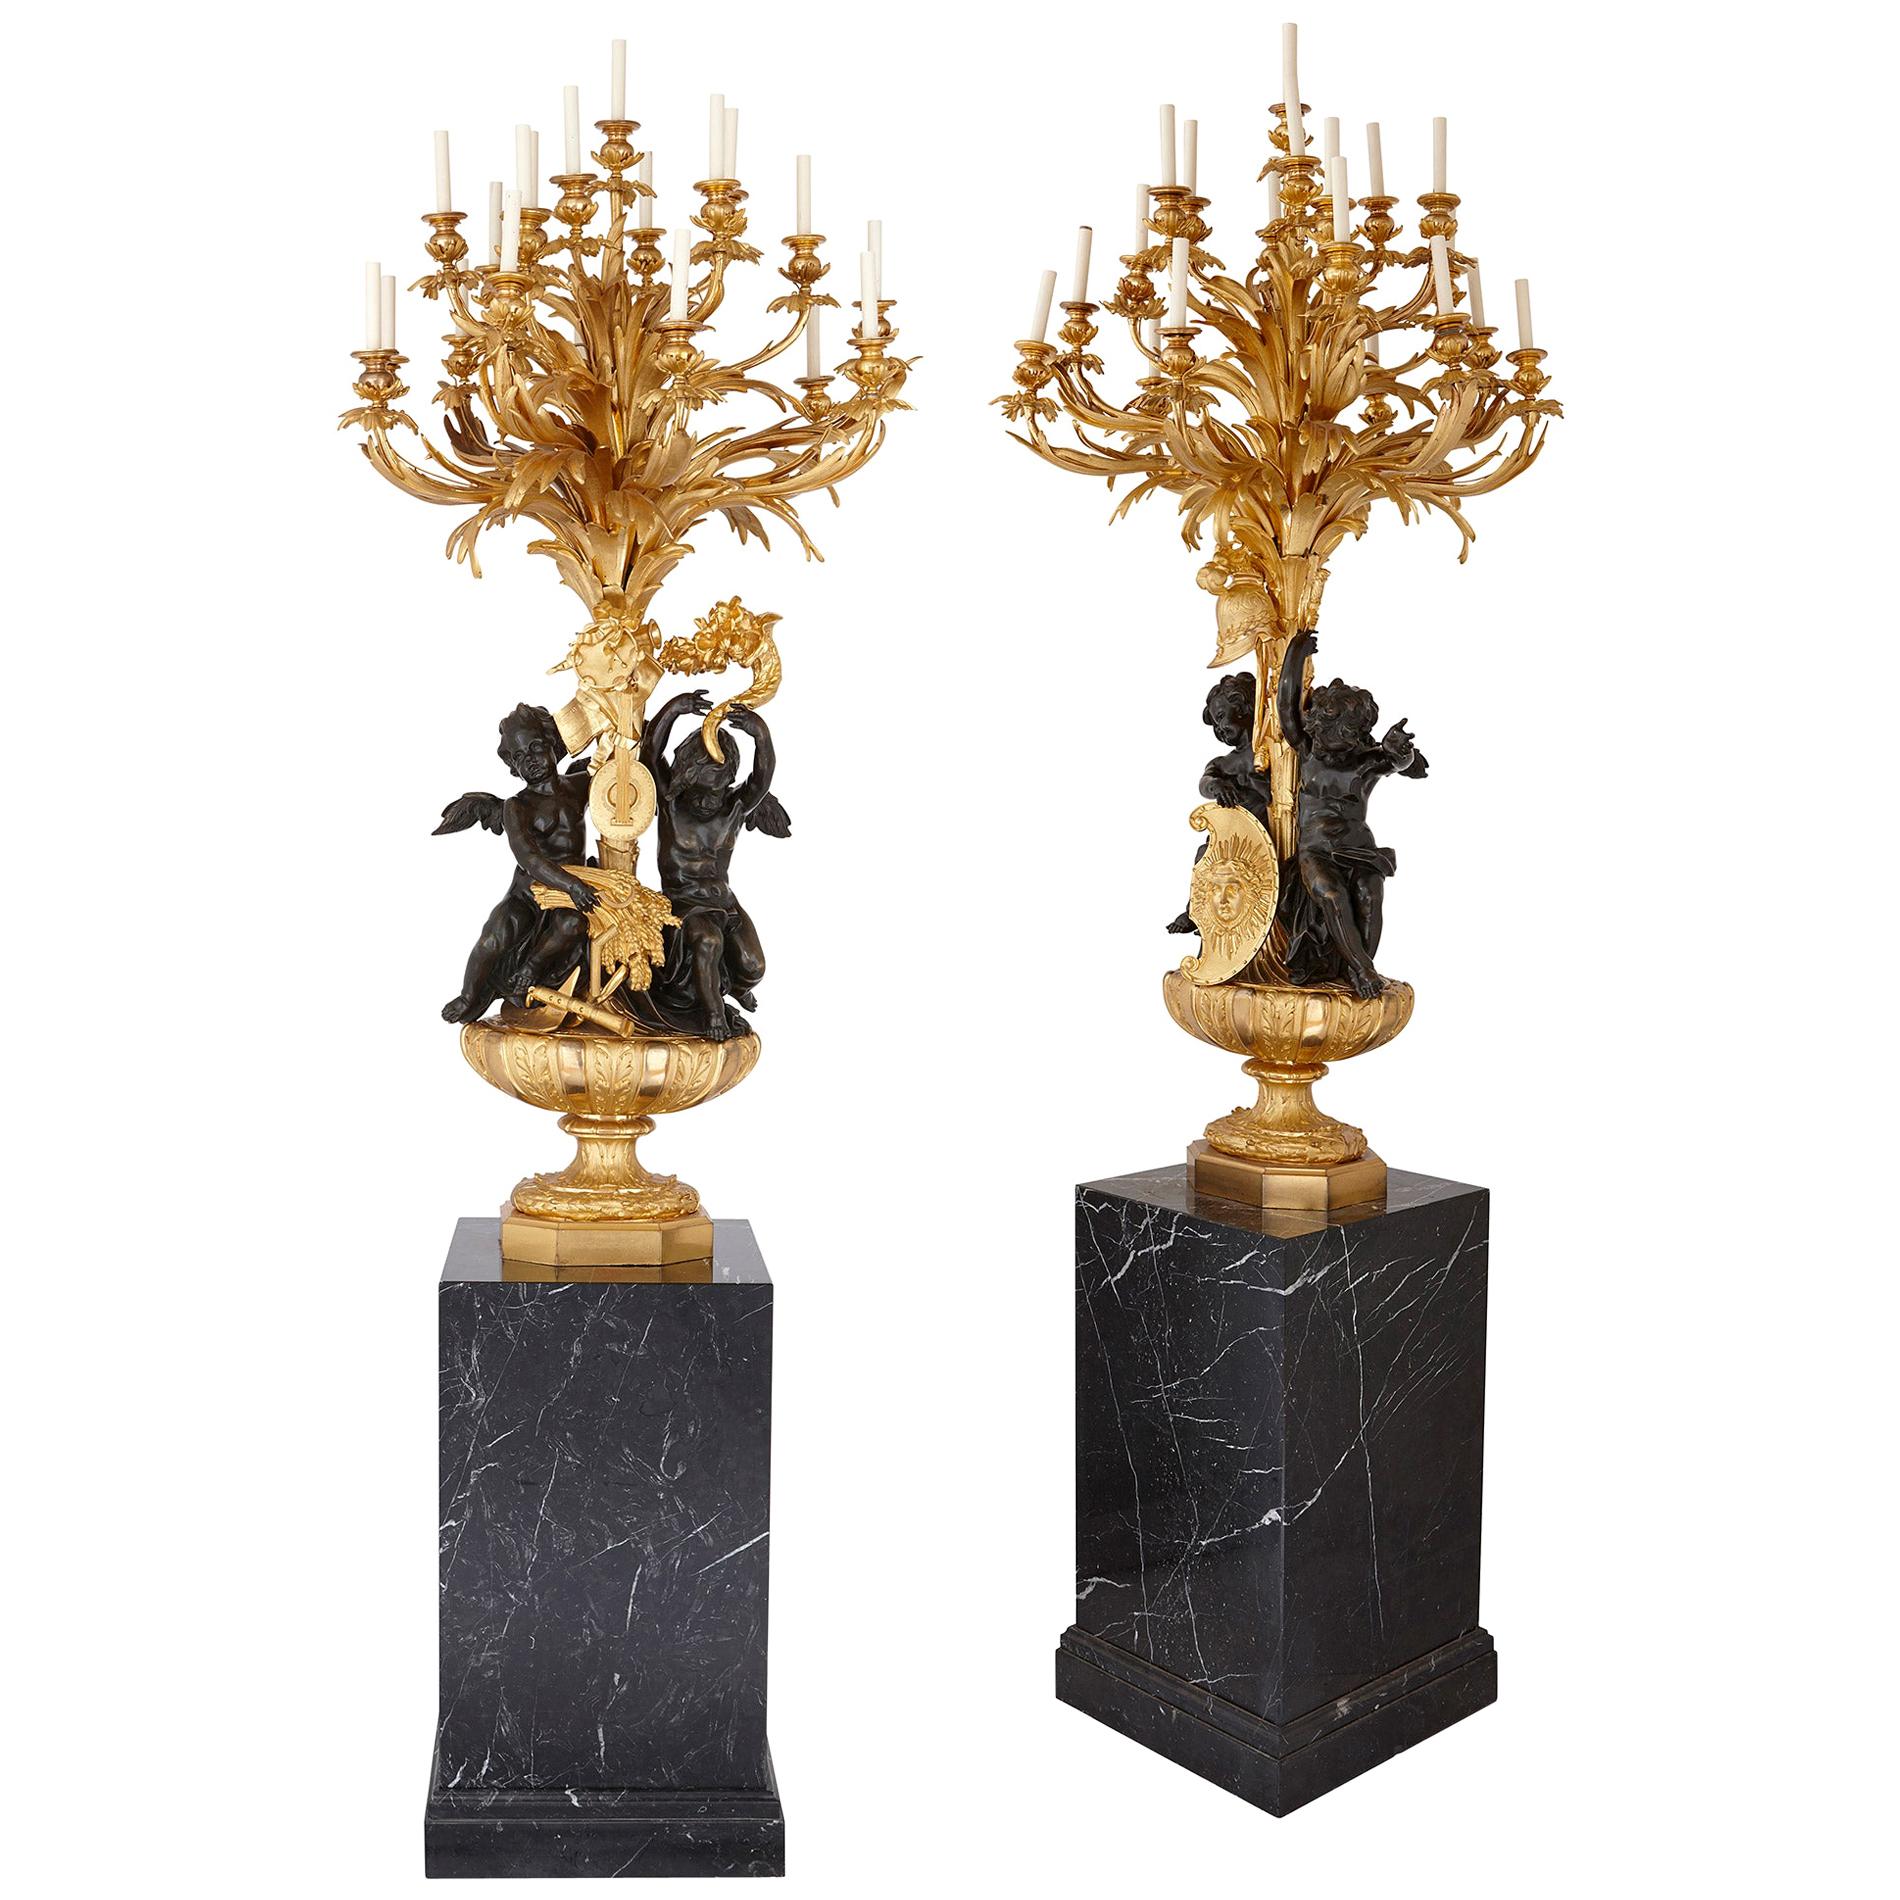 Monumental Gilt and Patinated Bronze Candelabra by Beurdeley